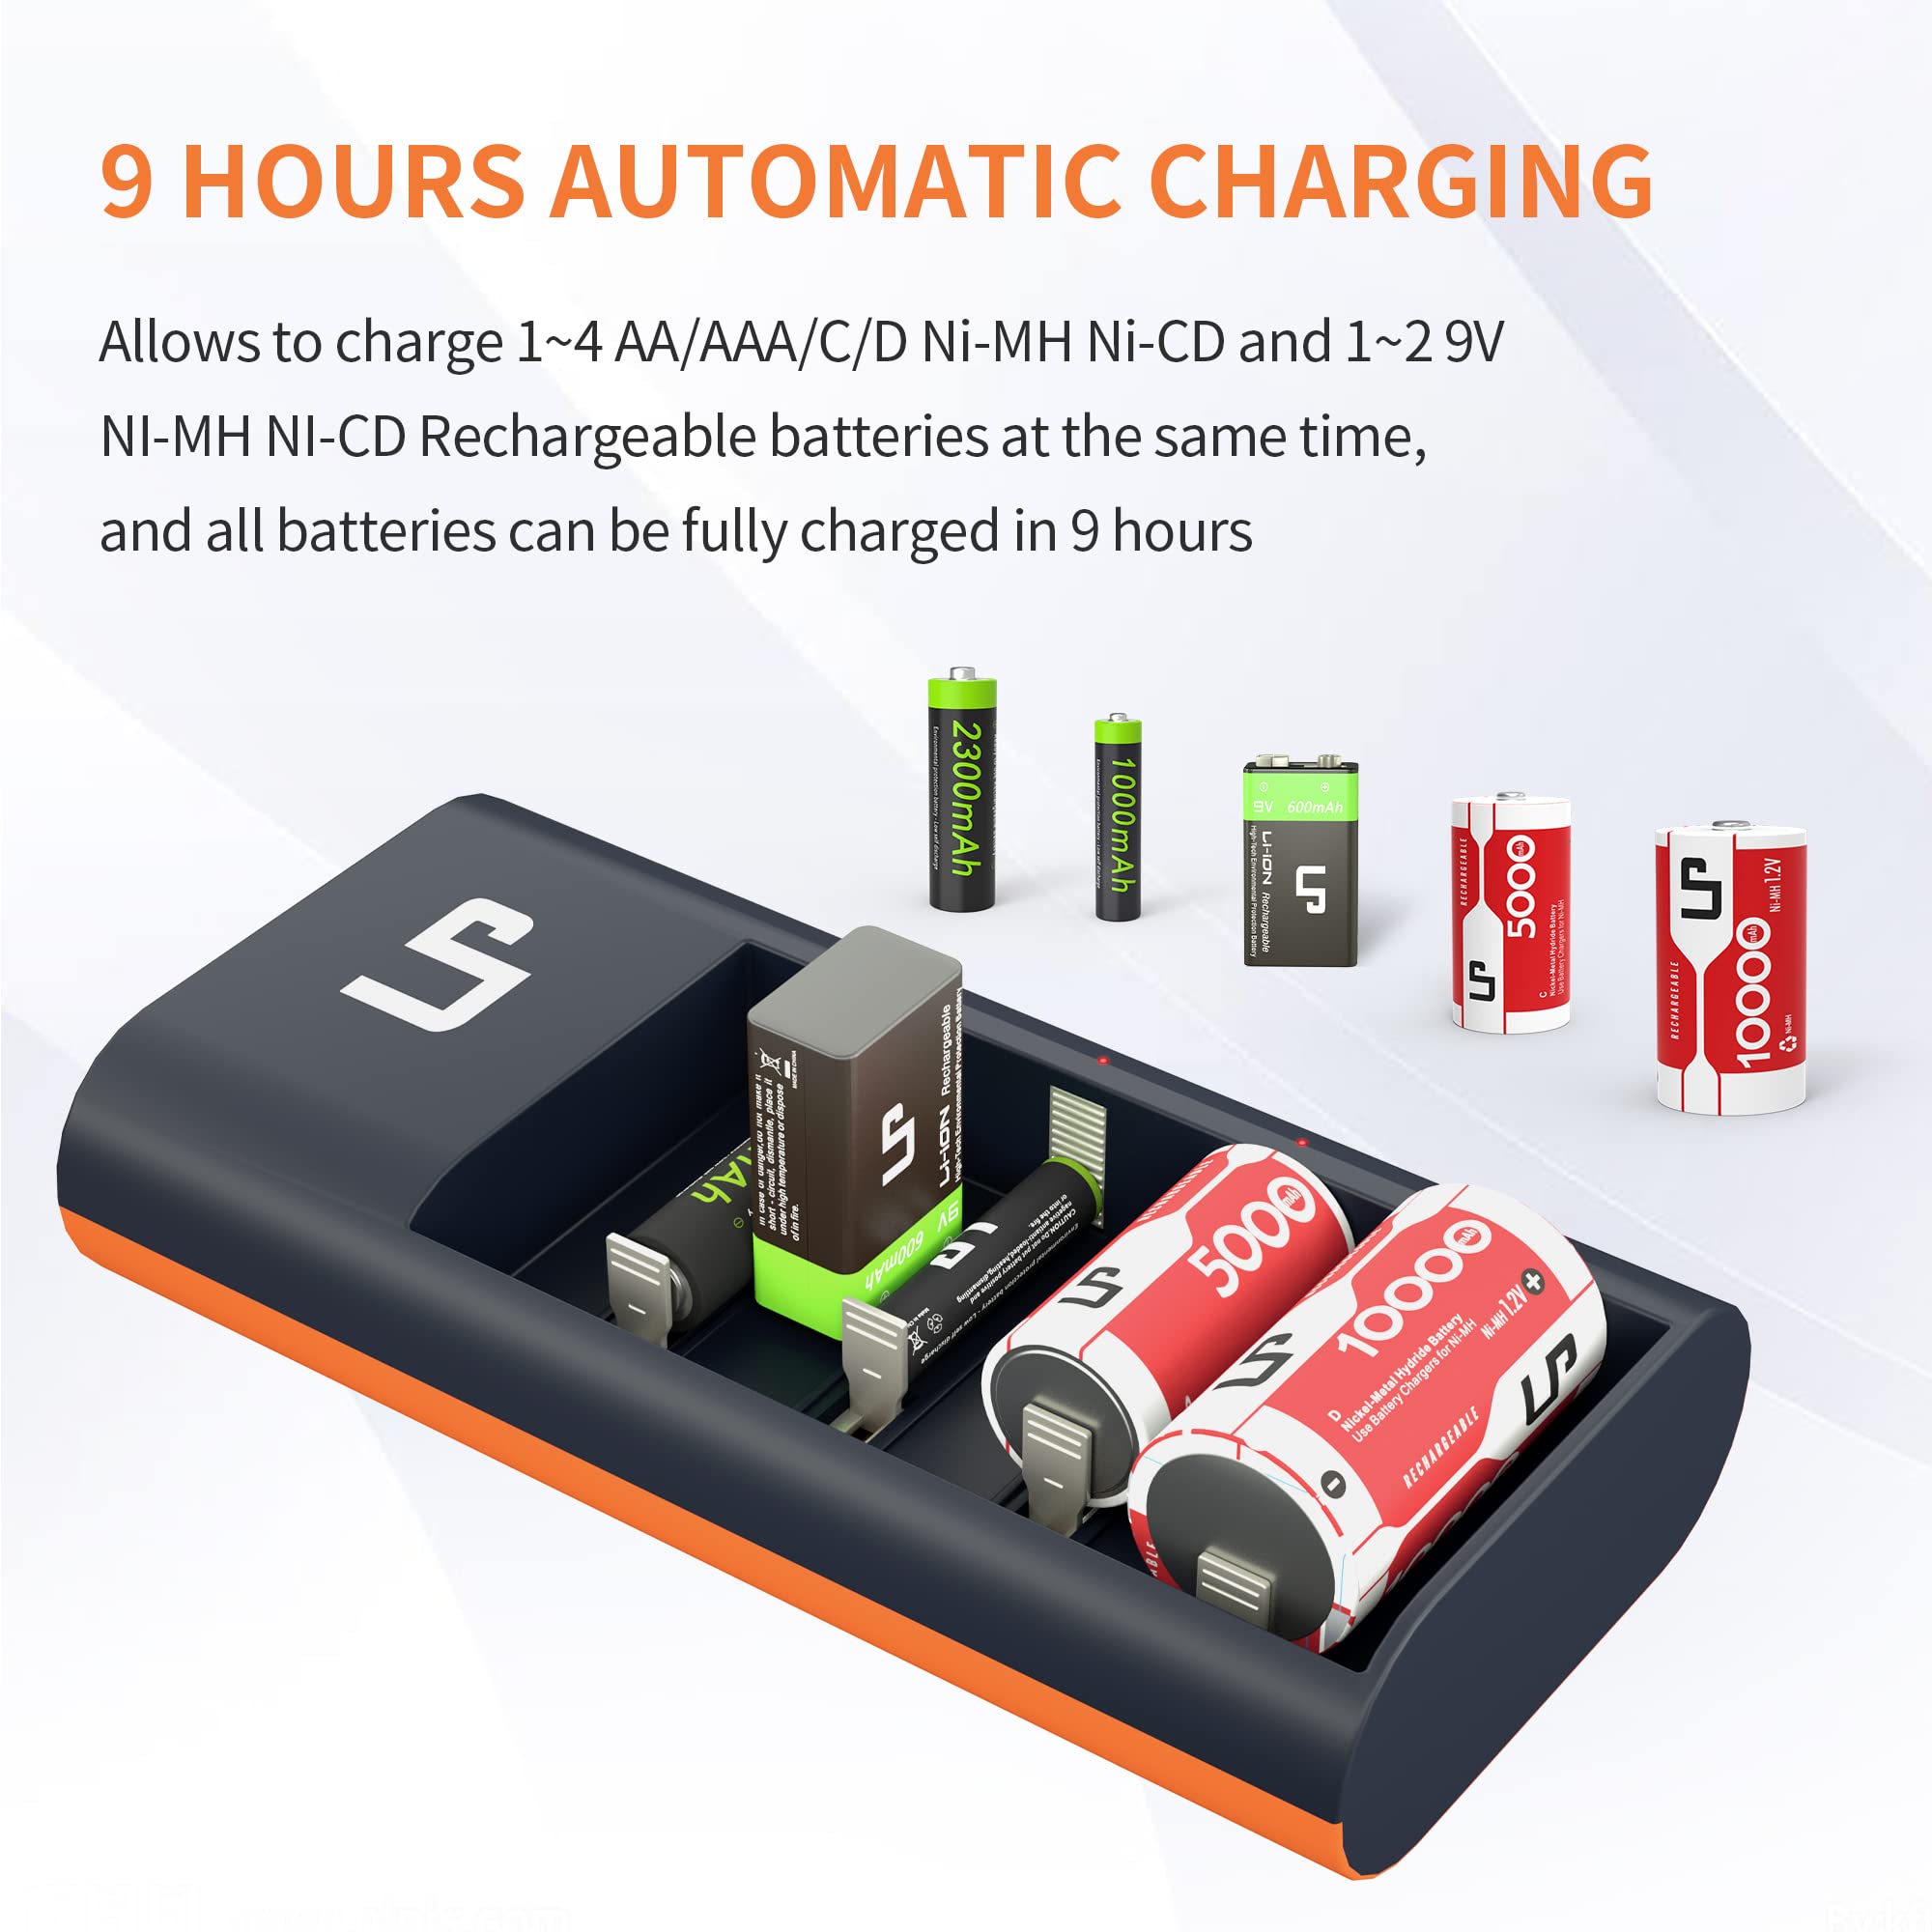 LP Universal Battery Charger LED Display for Rechargeable Batteries NI-MH NI-CD AA AAA C D 9V Li-ion, Smart Battery Charger with AC Adapter Fast Charging for 1.2V NI-MH NI-CD Batteries